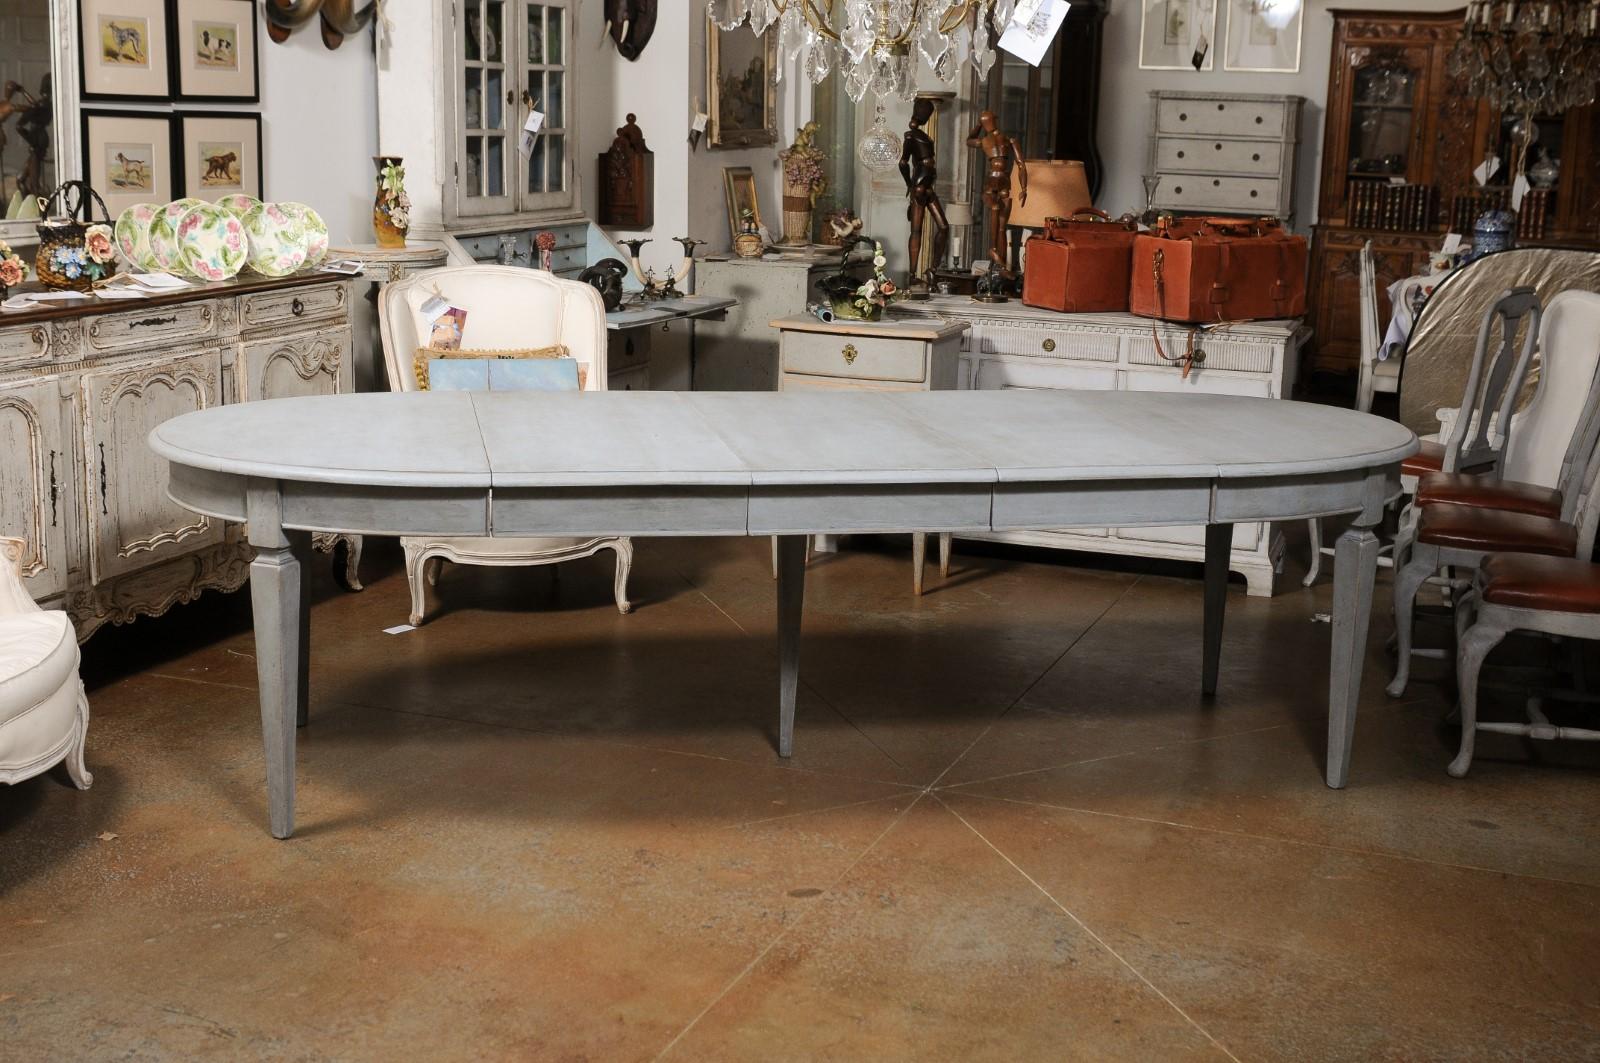 Carved Swedish Gustavian Style Dining Room Table with Custom Leaves and Tapered Legs